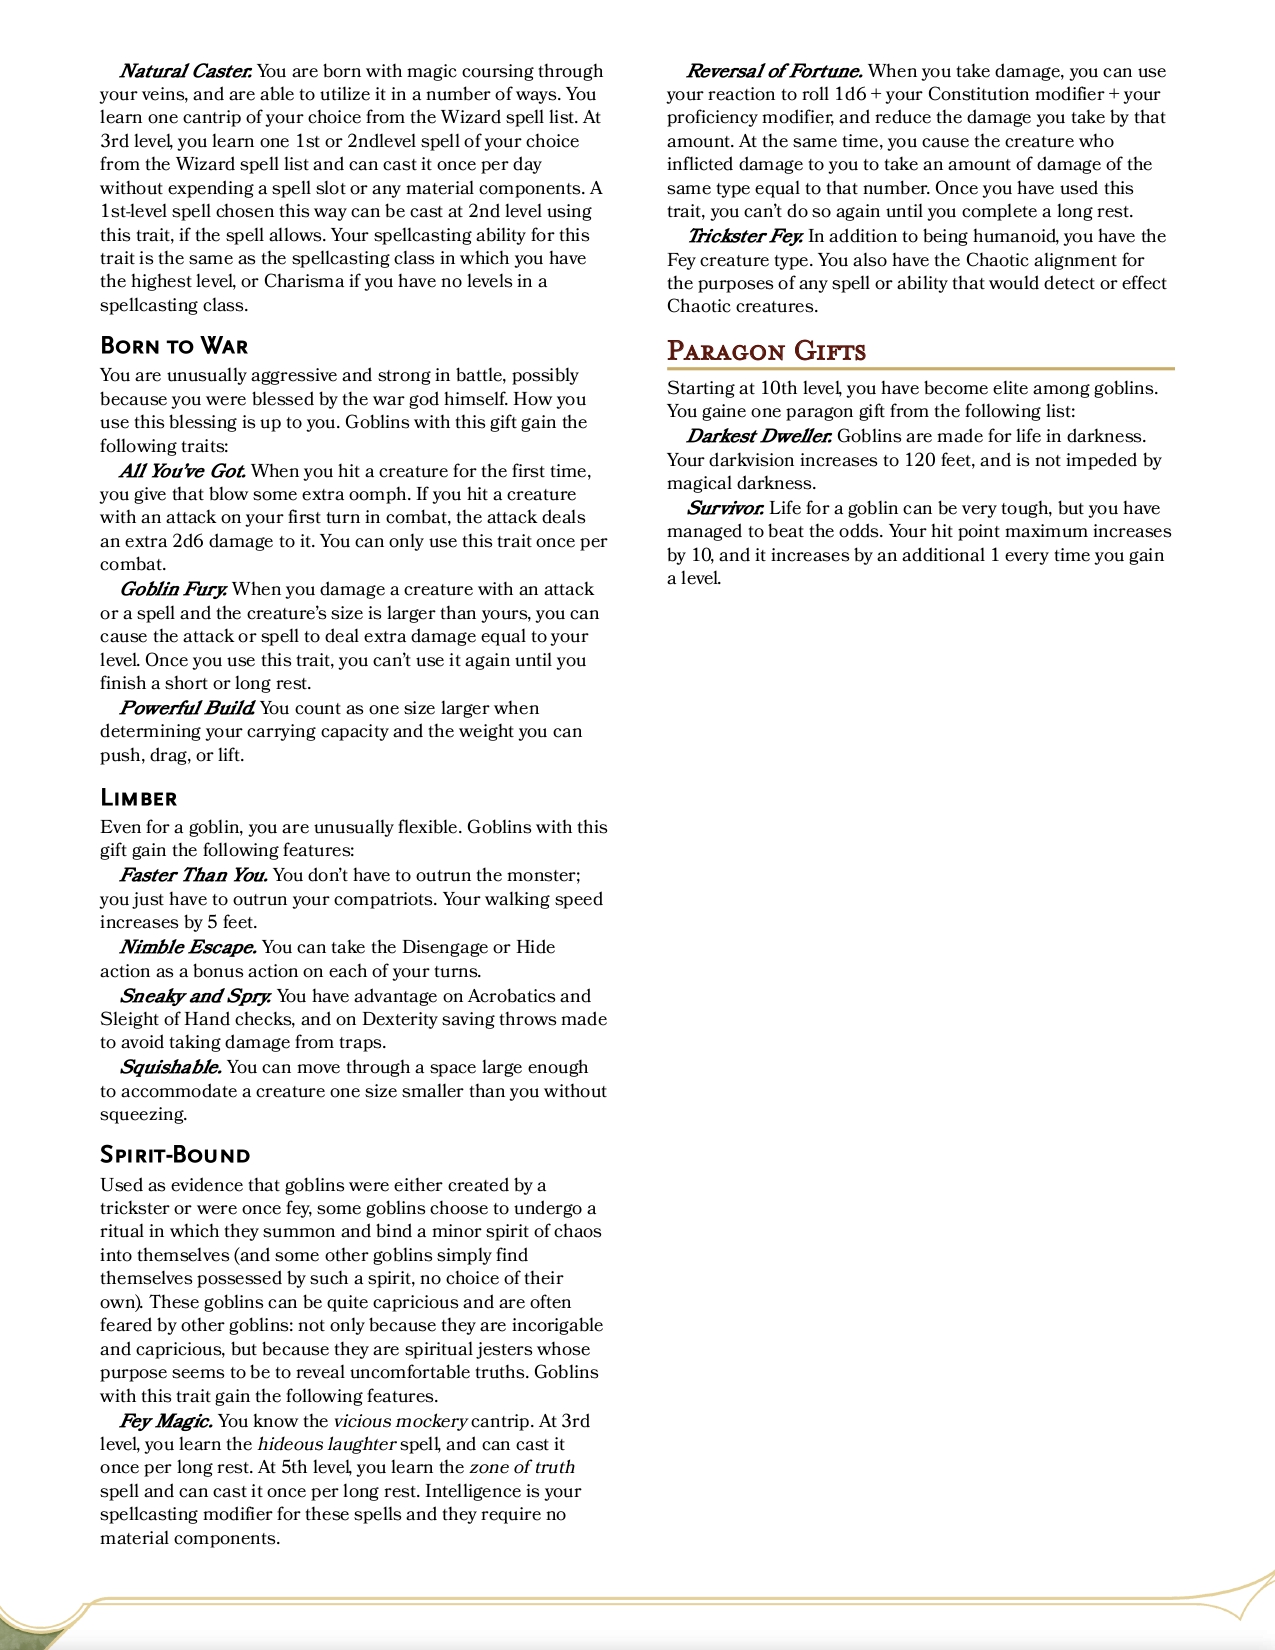 My Heritages and Cultures_page-0006.jpg